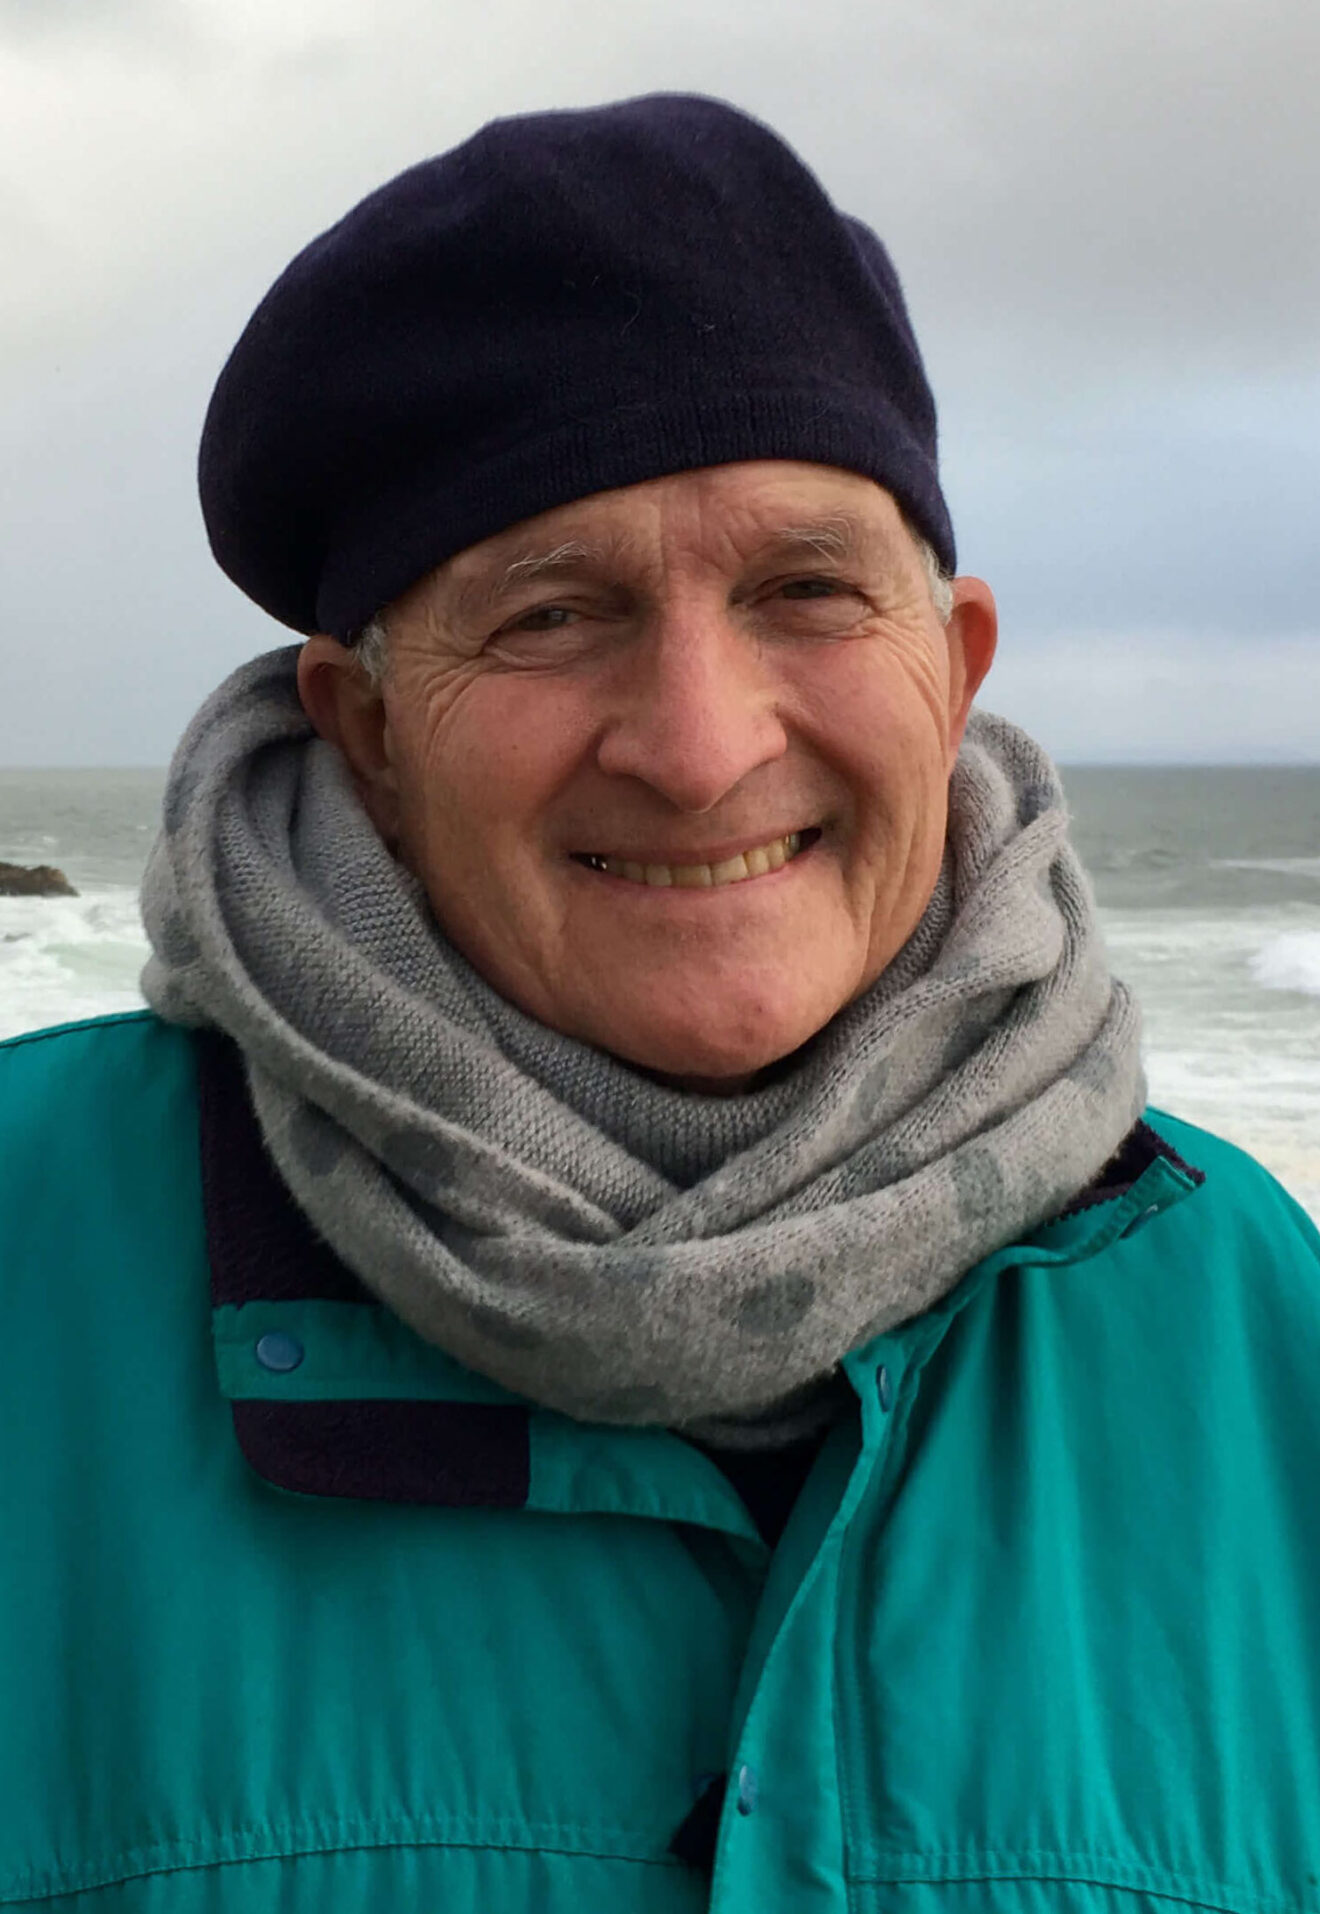 photo of Sheila's husband Wes who is smiling with the ocean behind him